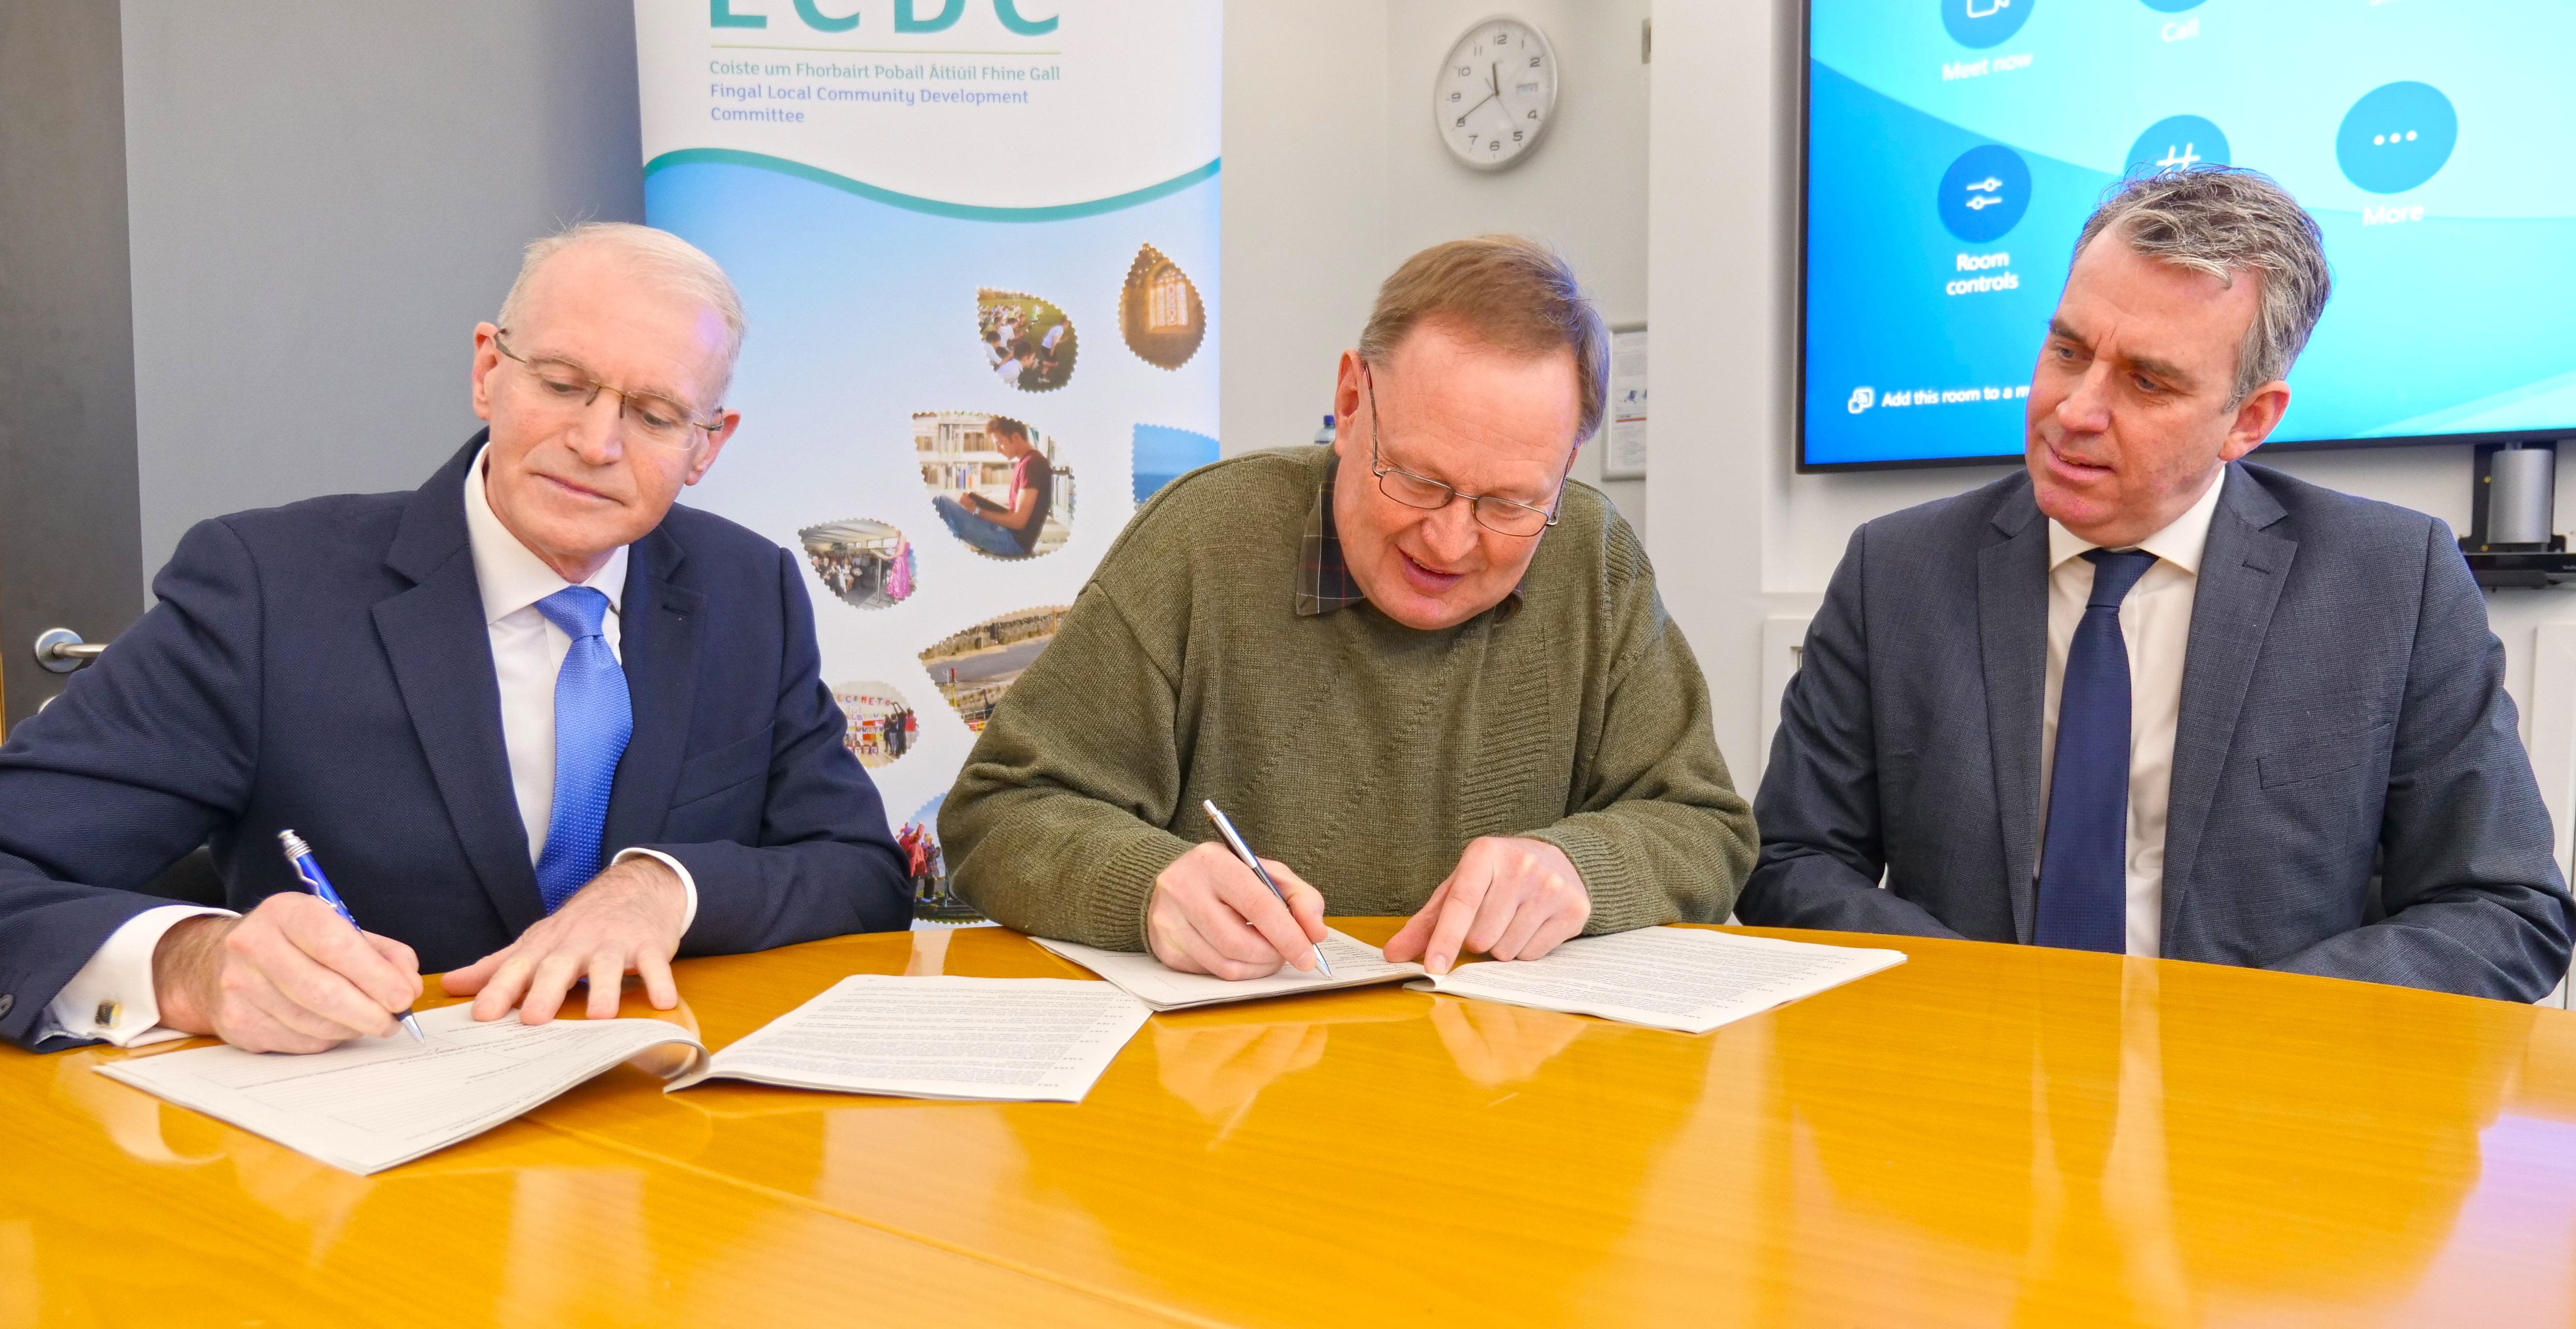 LCDC SICAP contract signing with Empower 2024